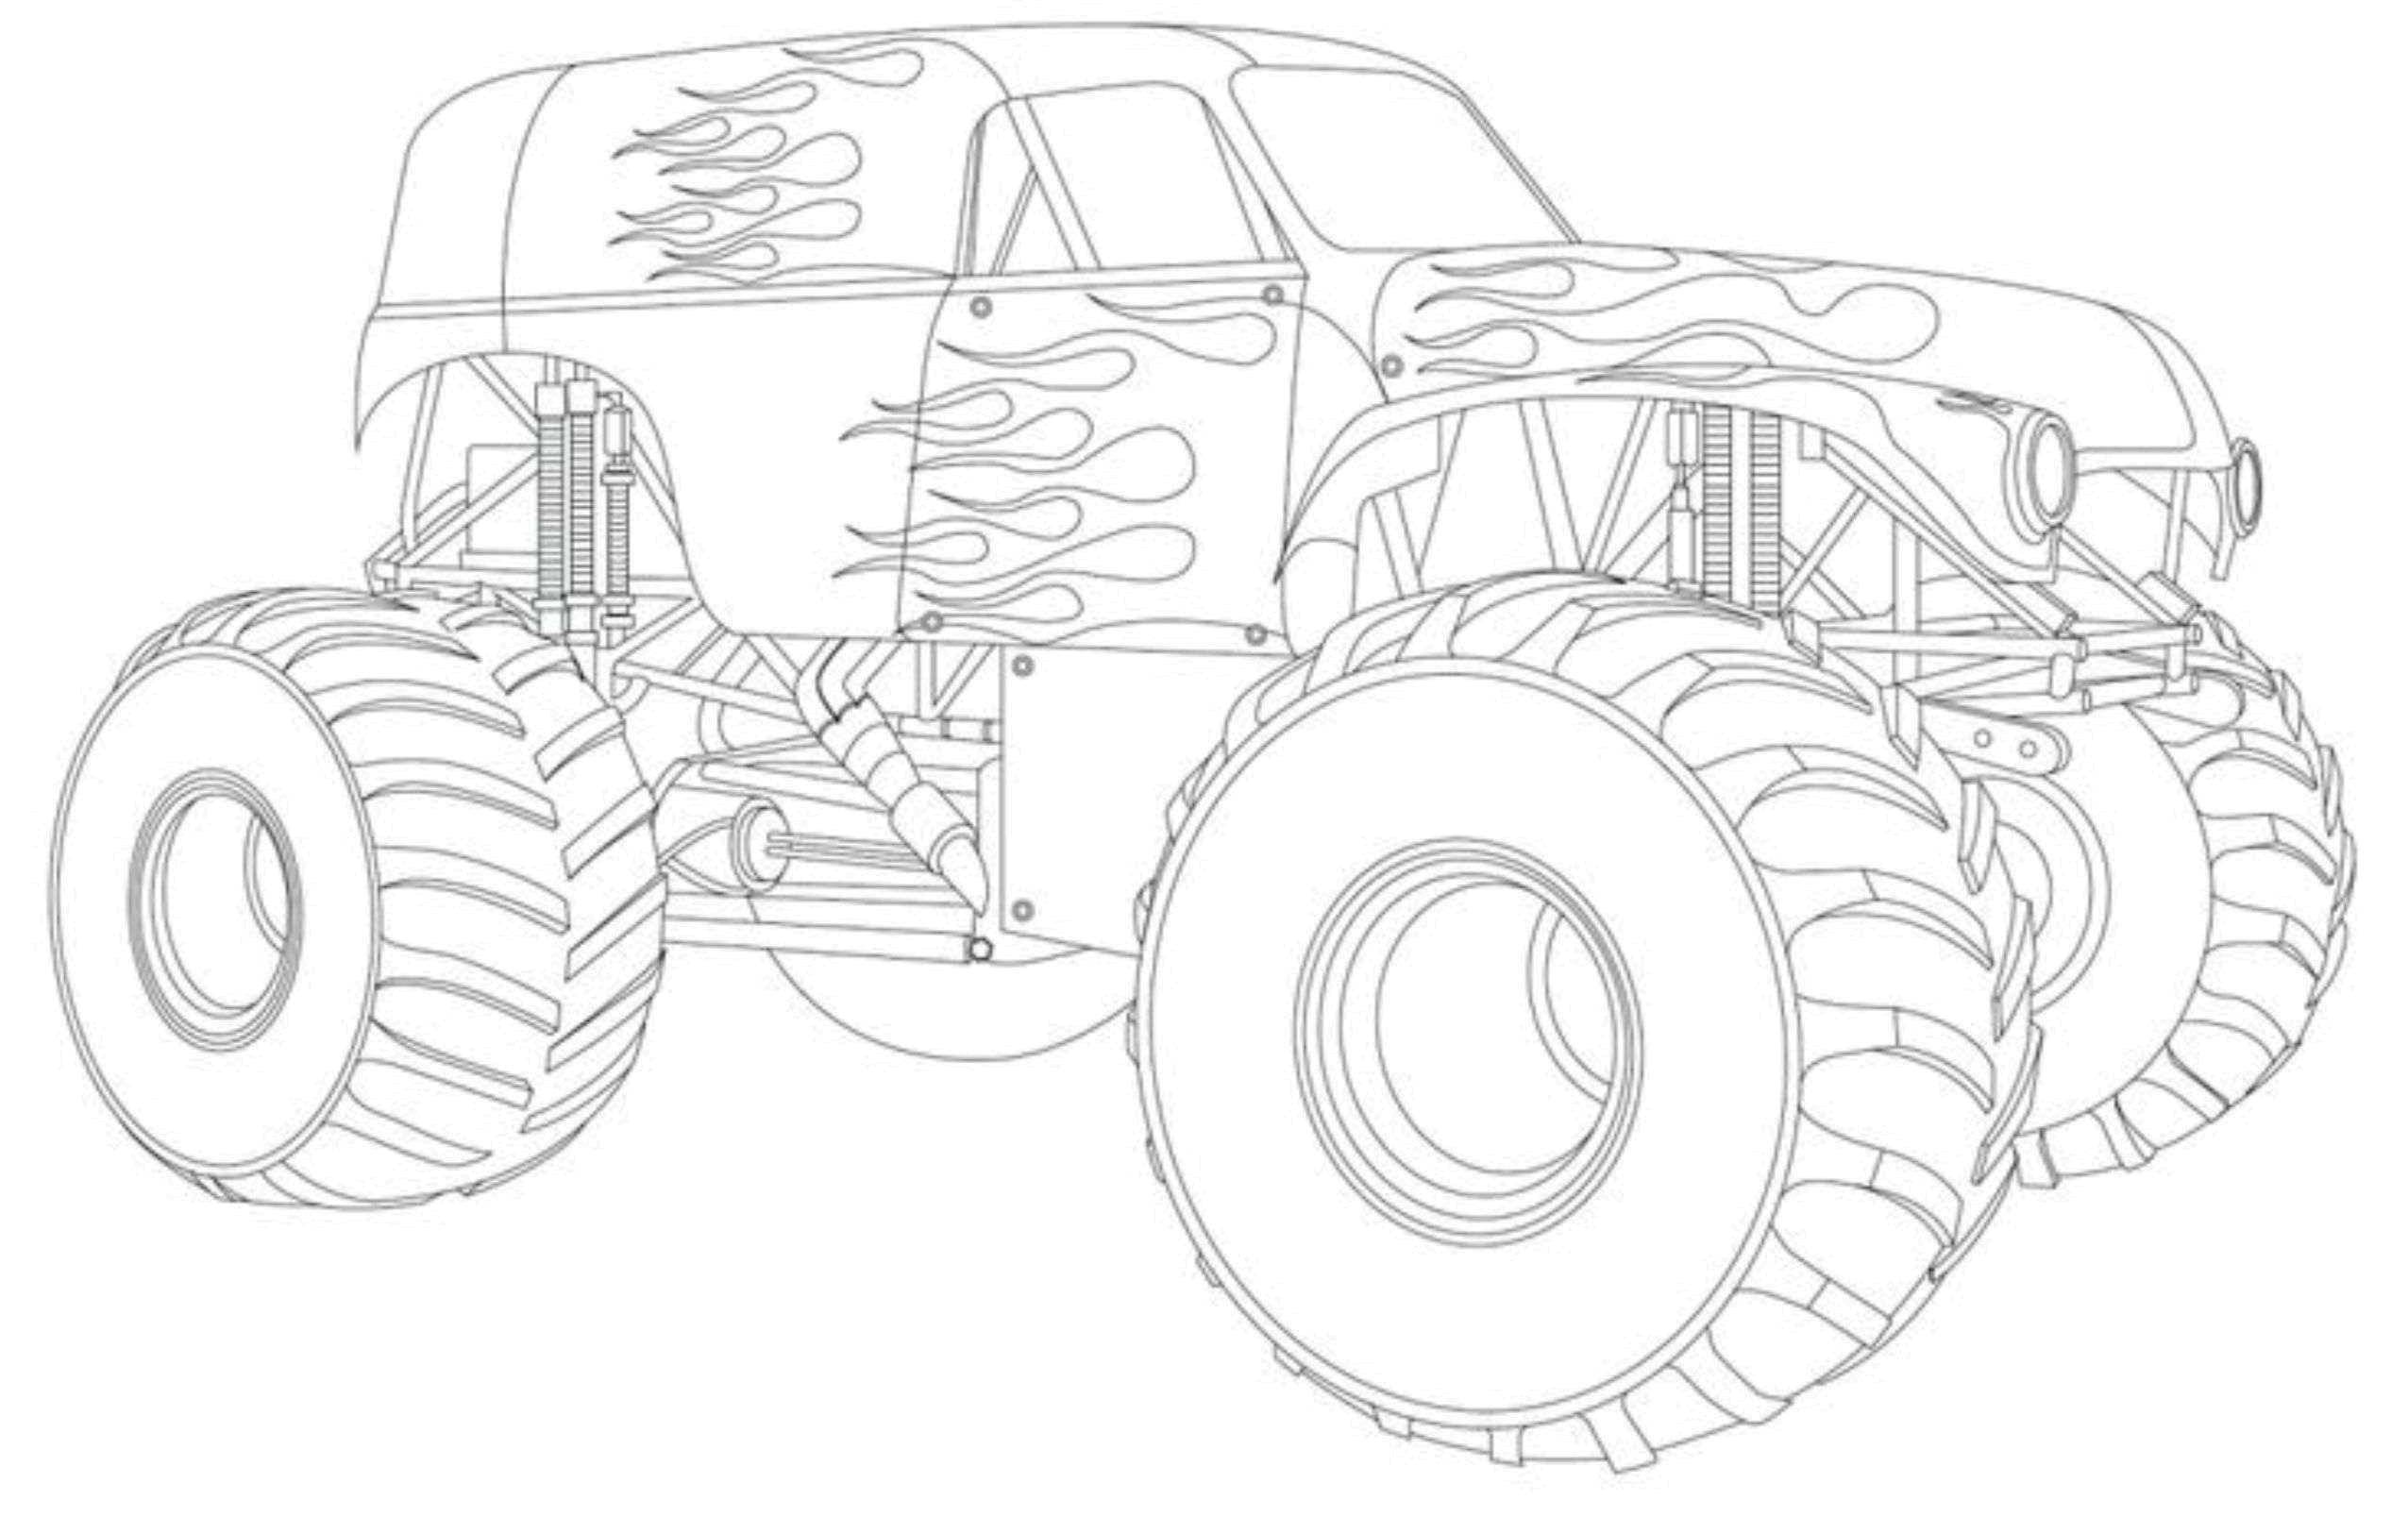 Coloring Car SUV. Category The contours of the machine. Tags:  cars, SUVs.